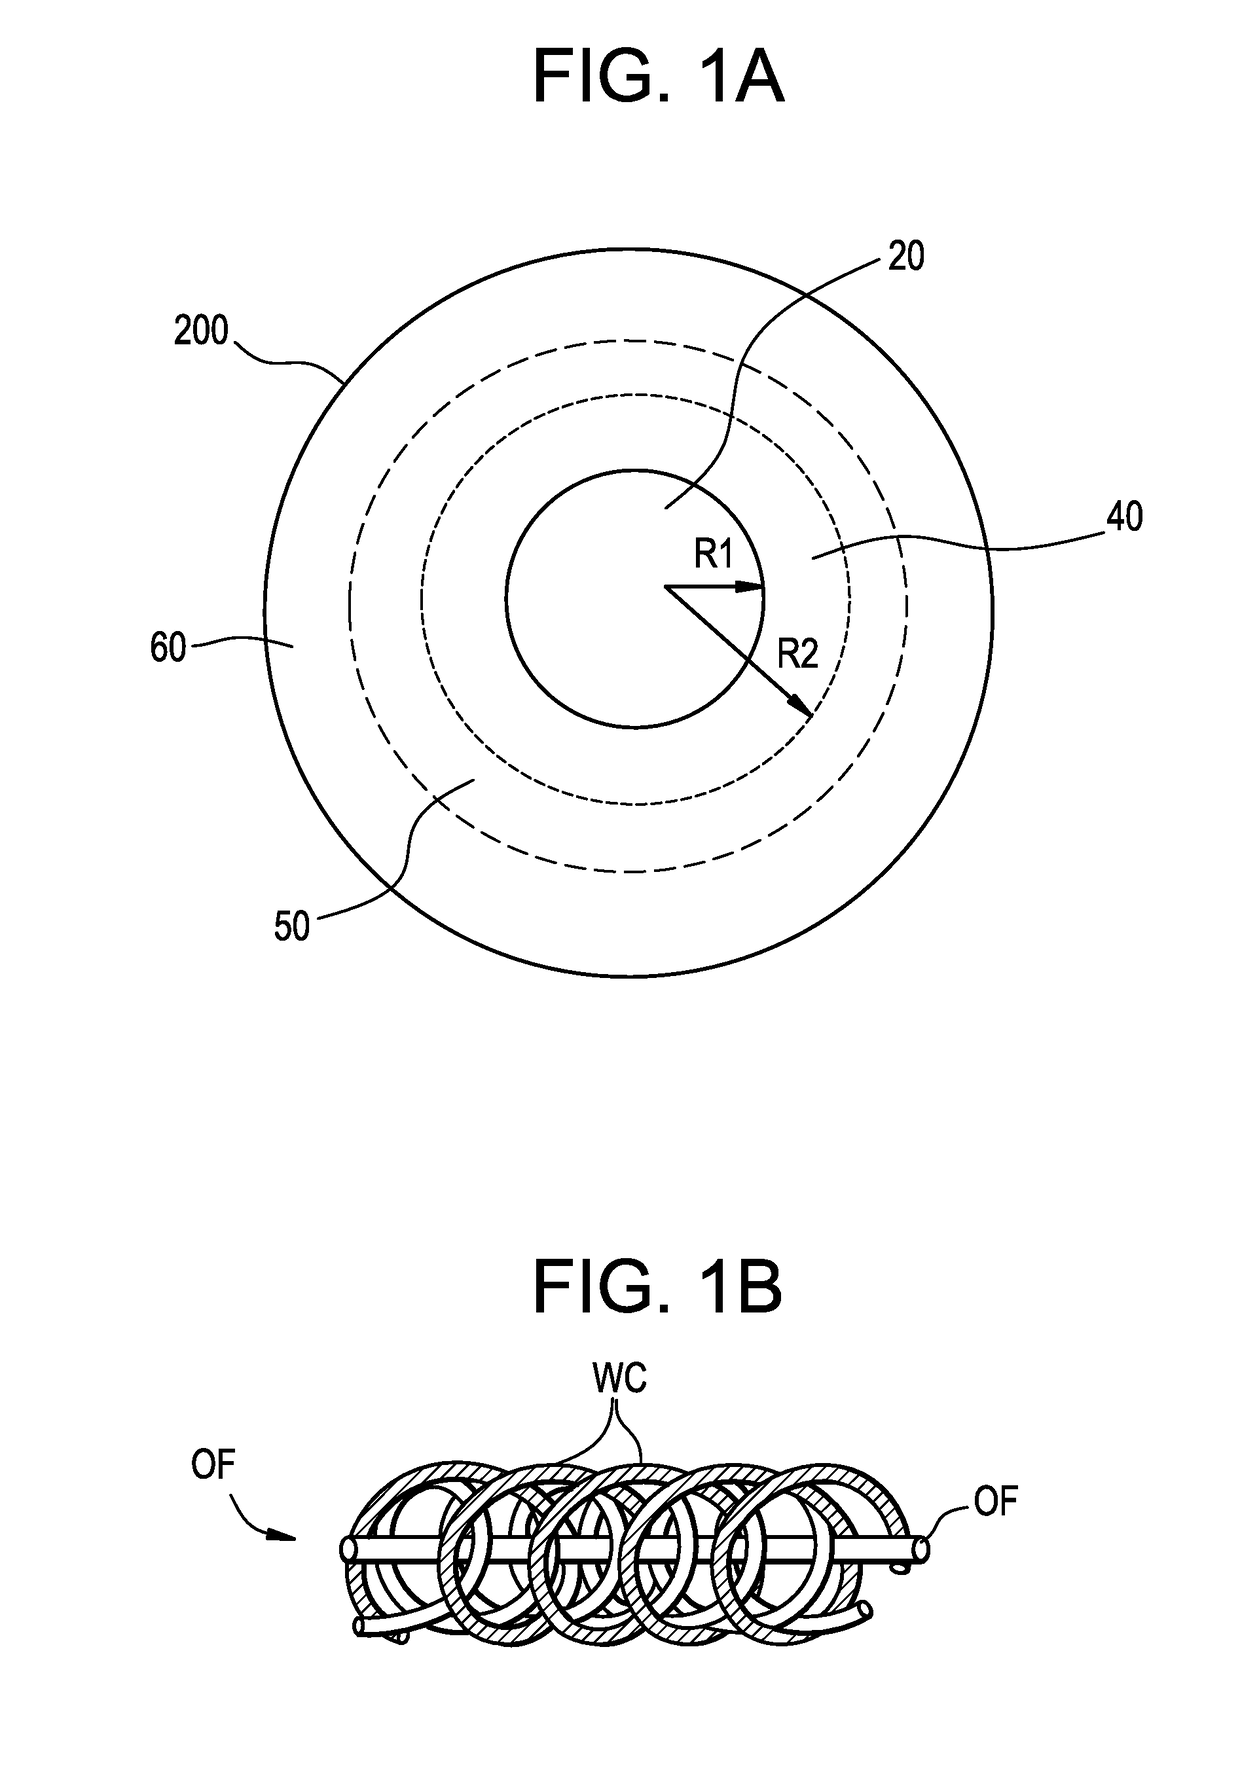 Multimode optical fibers operating over an extended wavelength range and system incorporating such